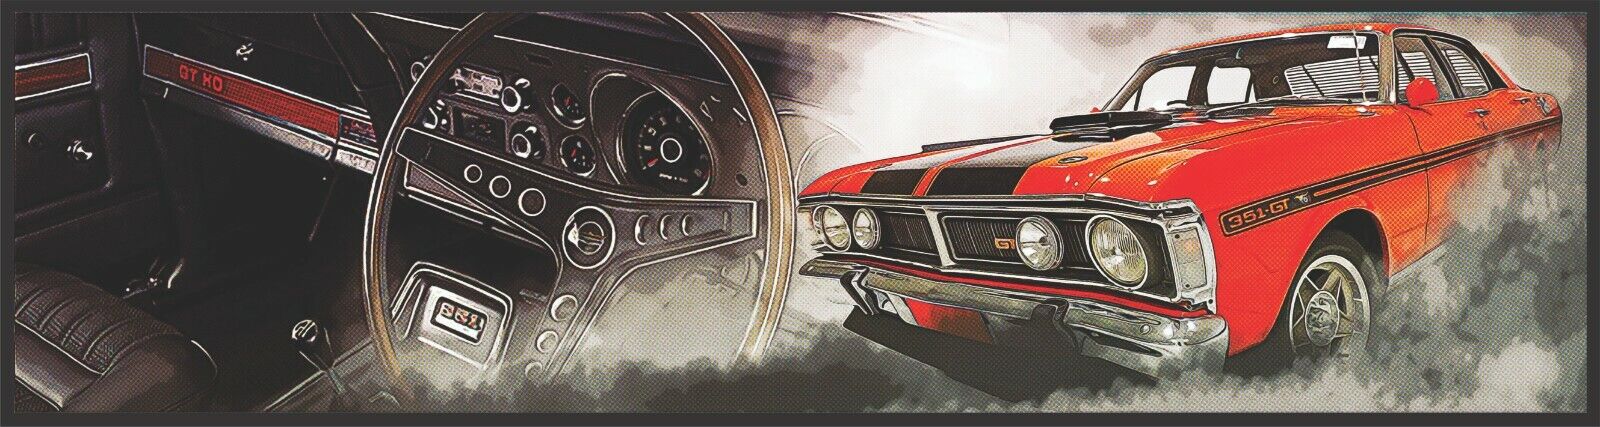 1971 Ford Falcon GT-HO Phase III Premium Branded Rubber Bar Mat - KING CAVE